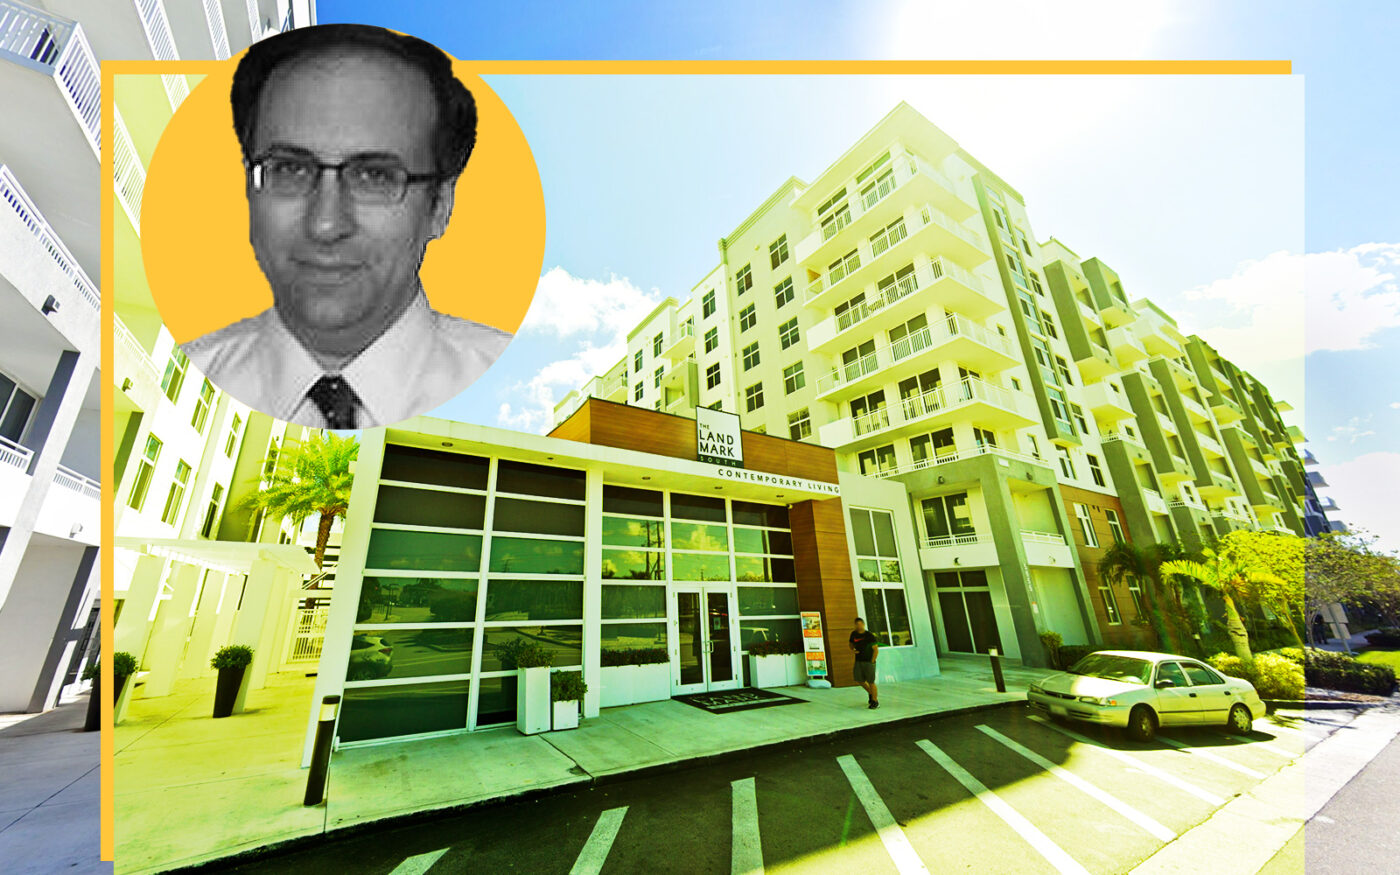 The Landmark South apartment complex at 6055 Northwest 105th Court in Doral with JBS Capital Group’s Jay Lobell